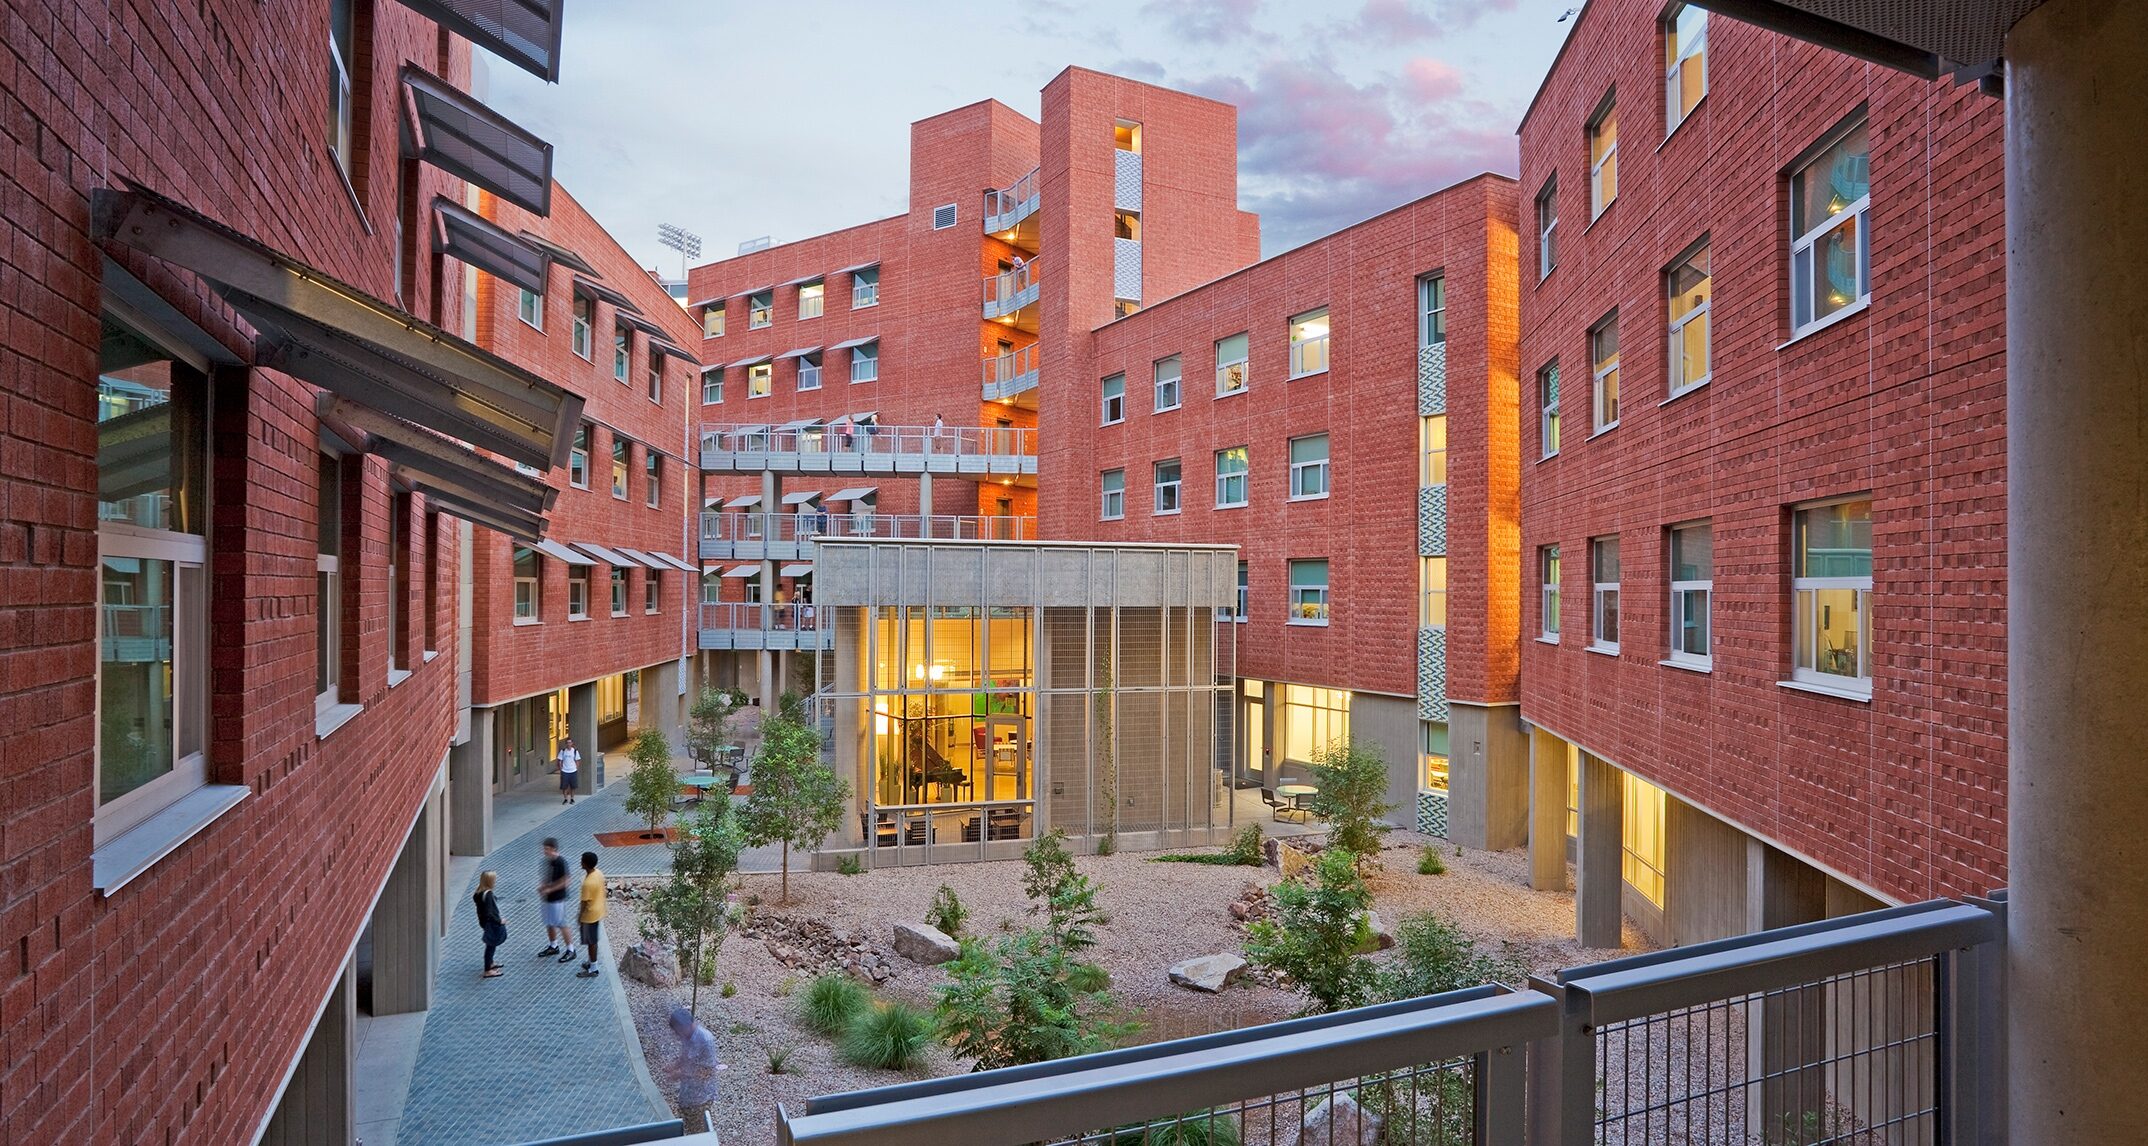 University of Arizona’s Likins Hall is wrapped around a central garden that resembles the rocky creek bed of an arroyo. Not only does this feature collect runoff and engage students in environmental stewardship, it builds respect and appreciation for the desert context surrounding the campus.” — NAC Architecture